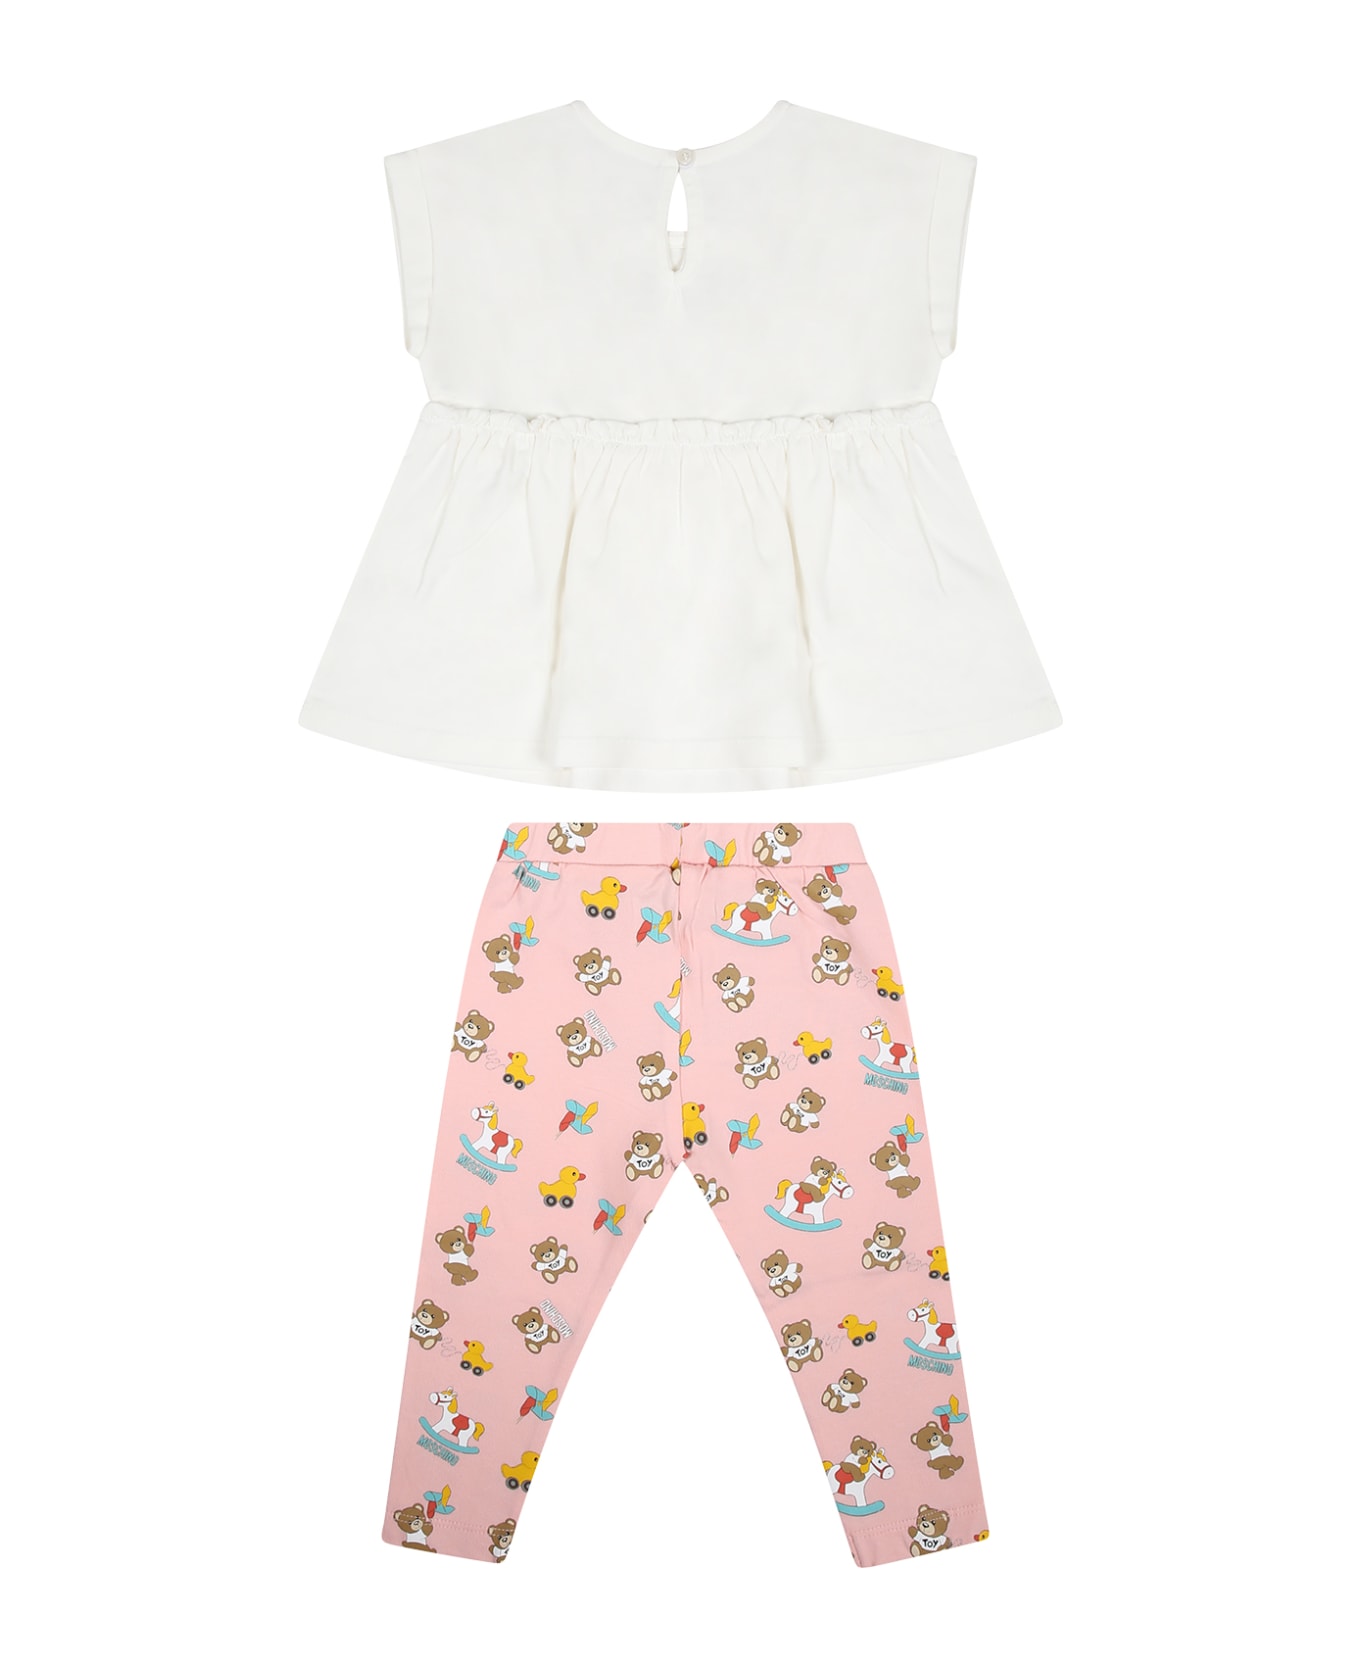 Moschino Multicolor Set For Baby Girl With Teddy Bear And Ducks - Multicolor ボトムス